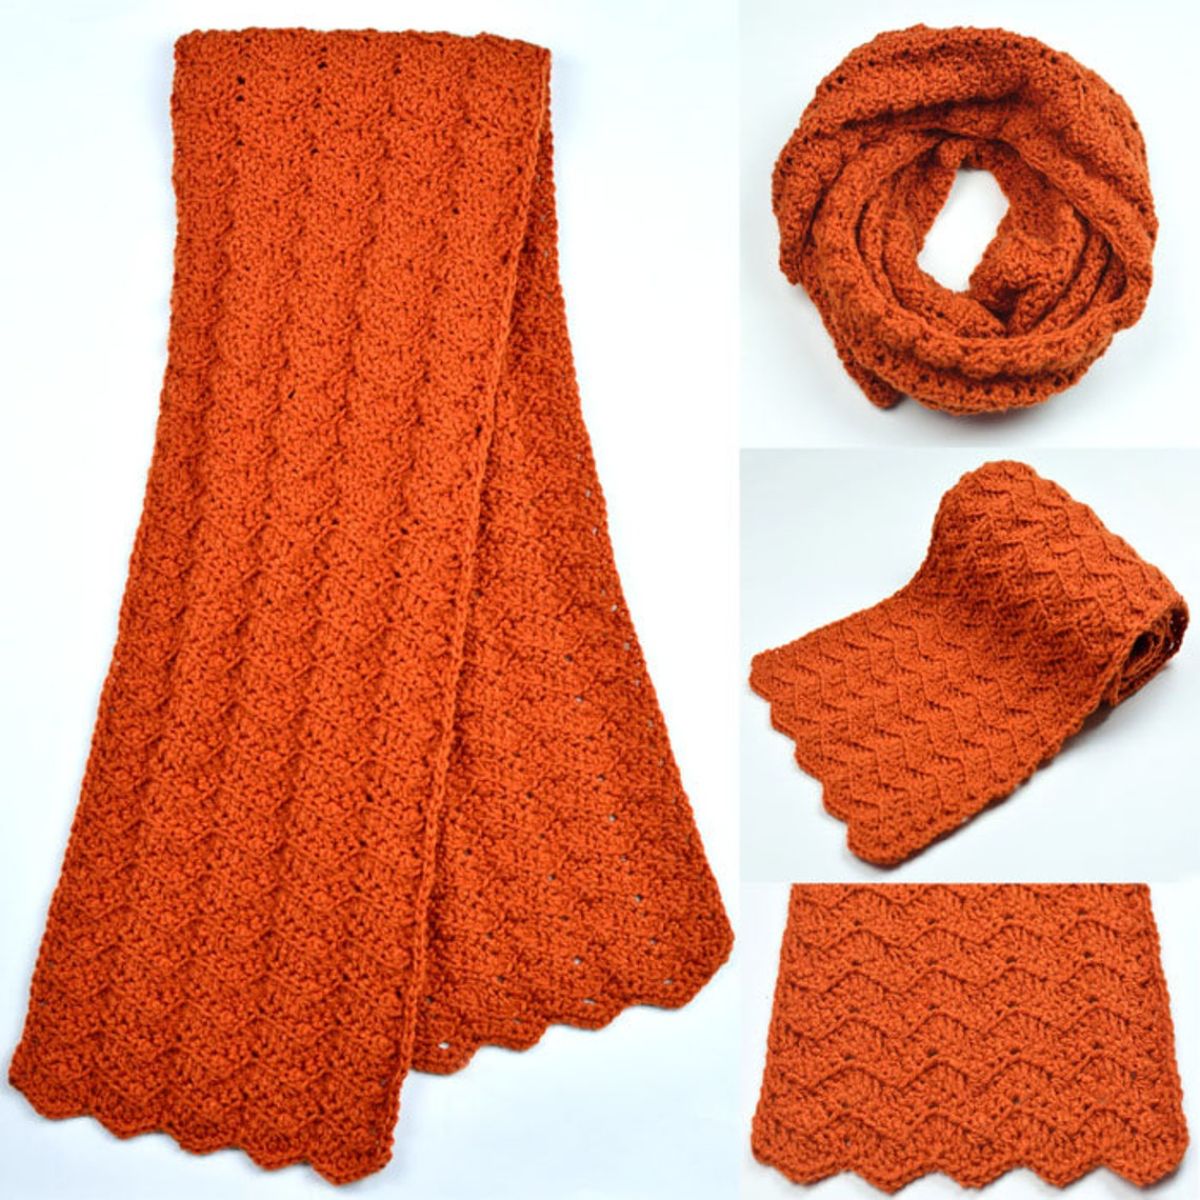 An orange crochet chevron style scarf folded in half next to the same scarf in a circle with a scalloped trim on the bottom.